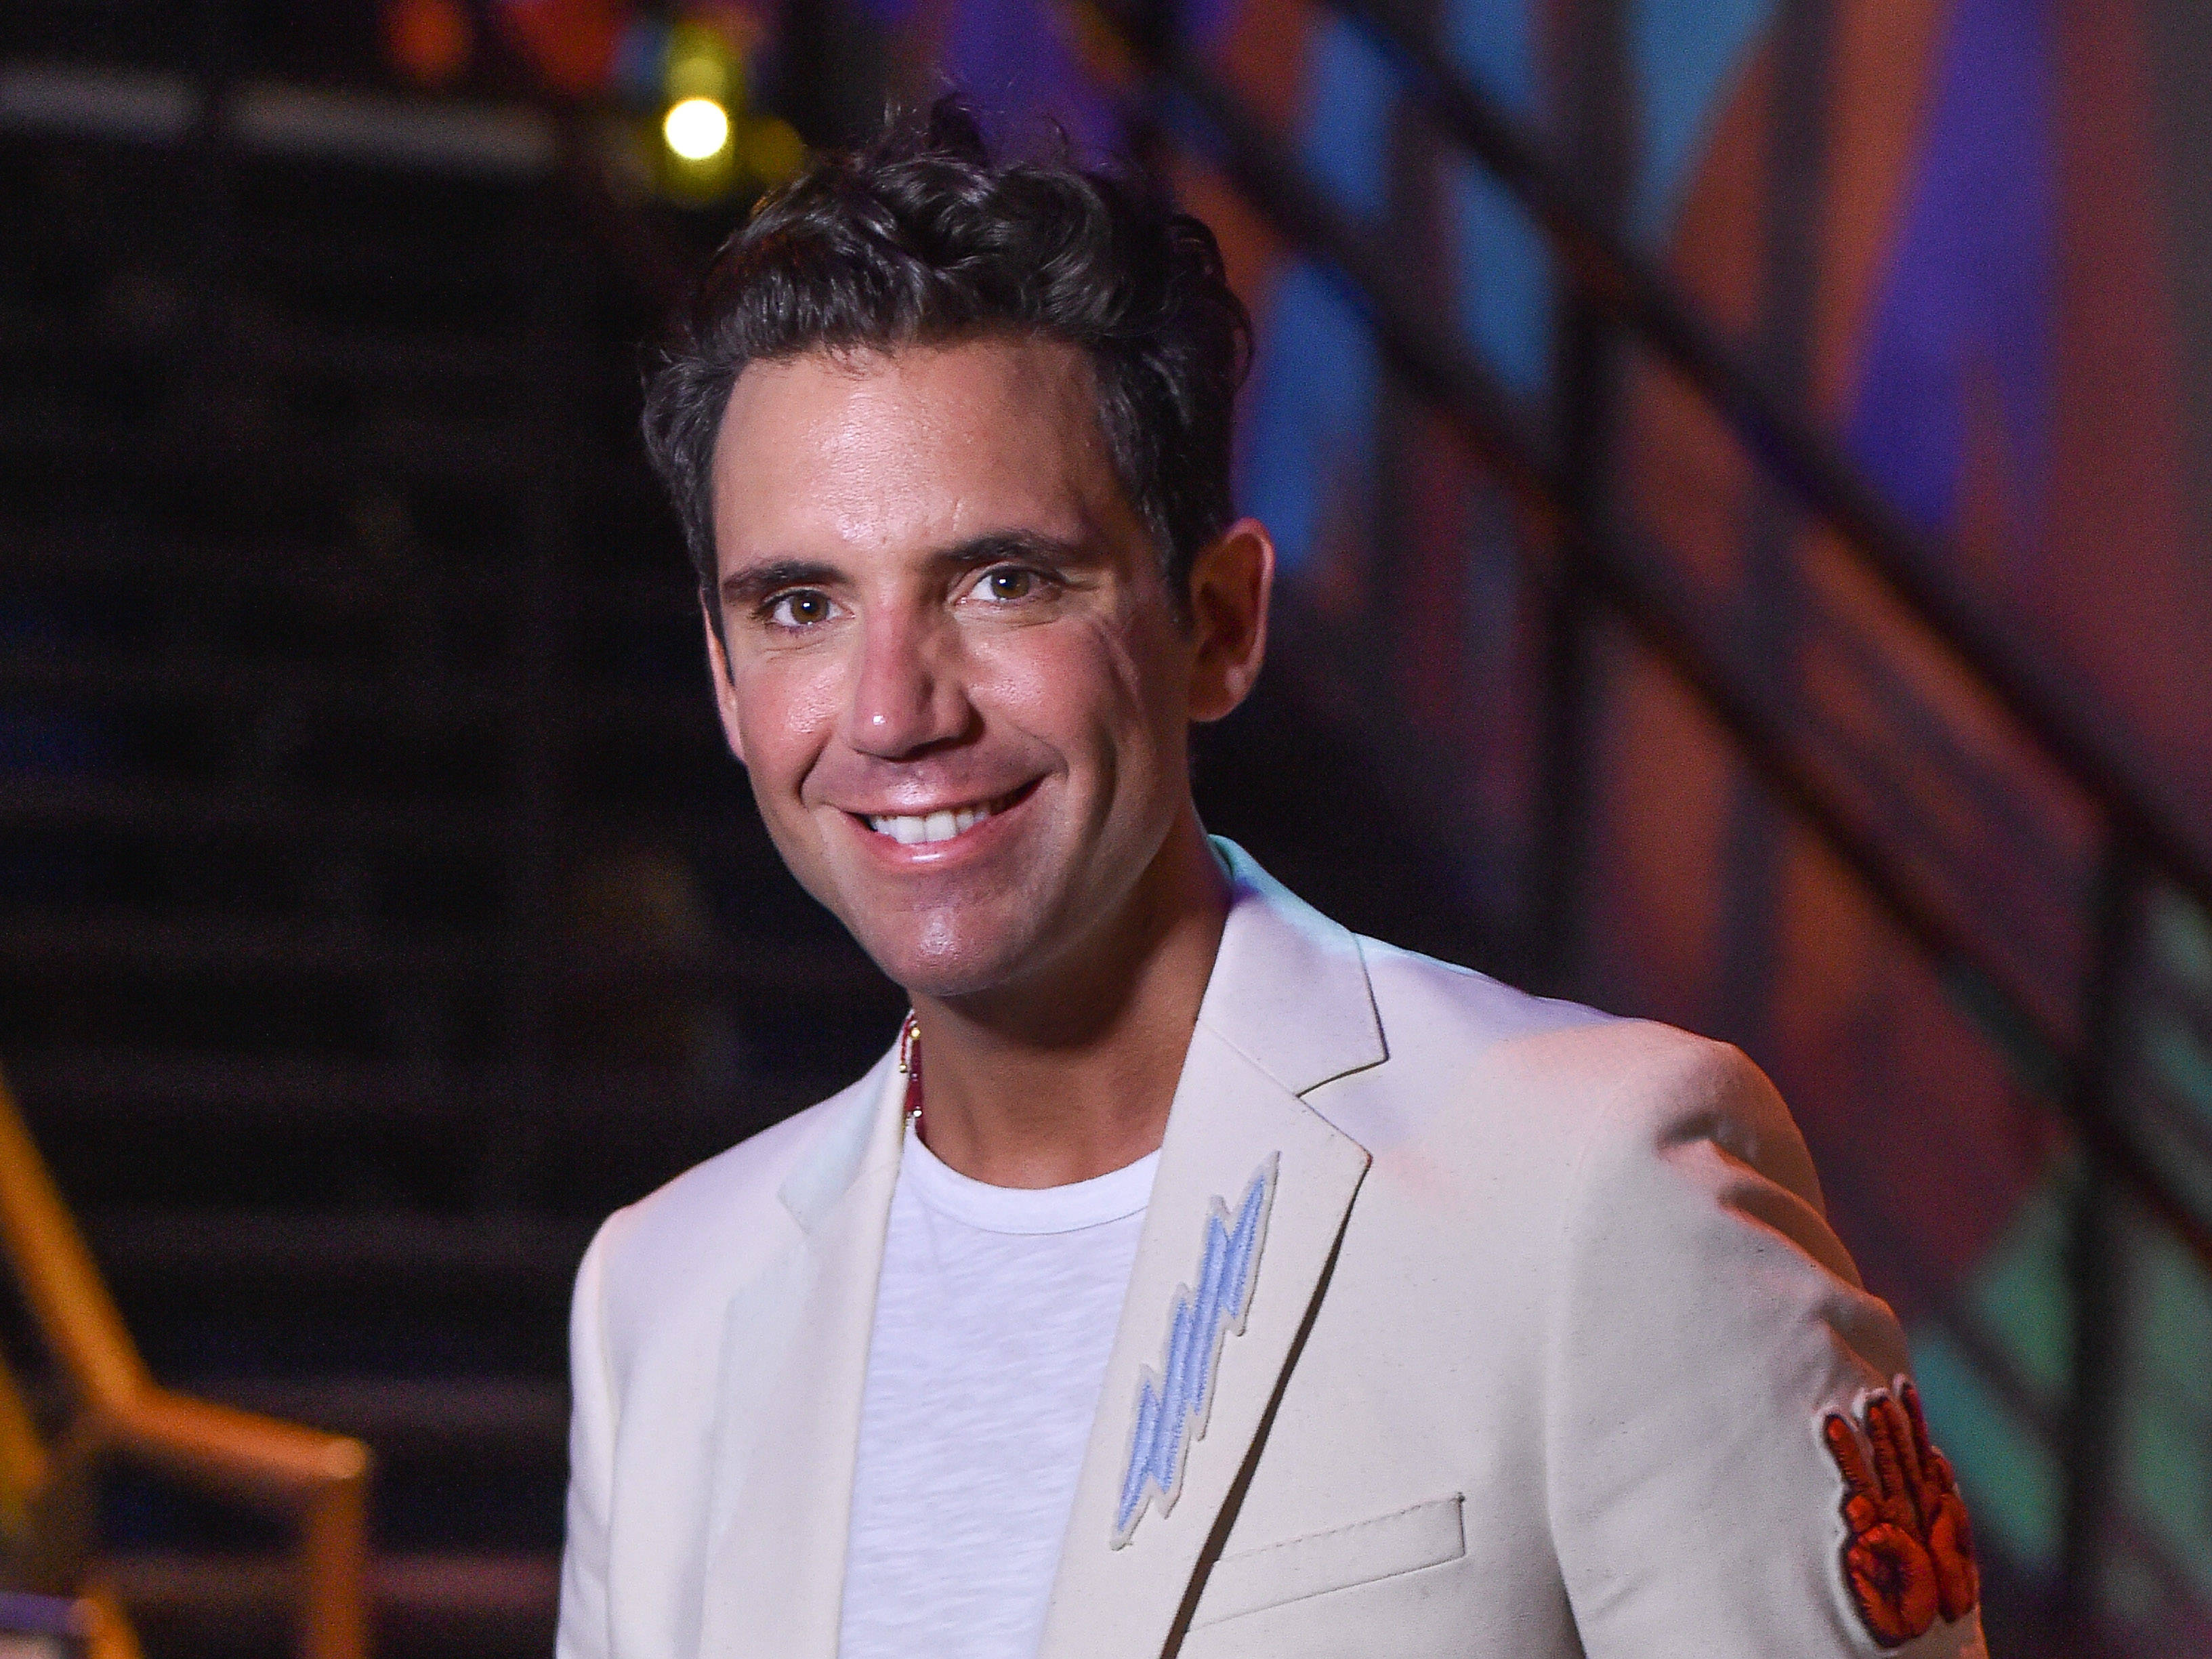 Mika facts: Singer's age, partner, height, songs and more revealed - Smooth